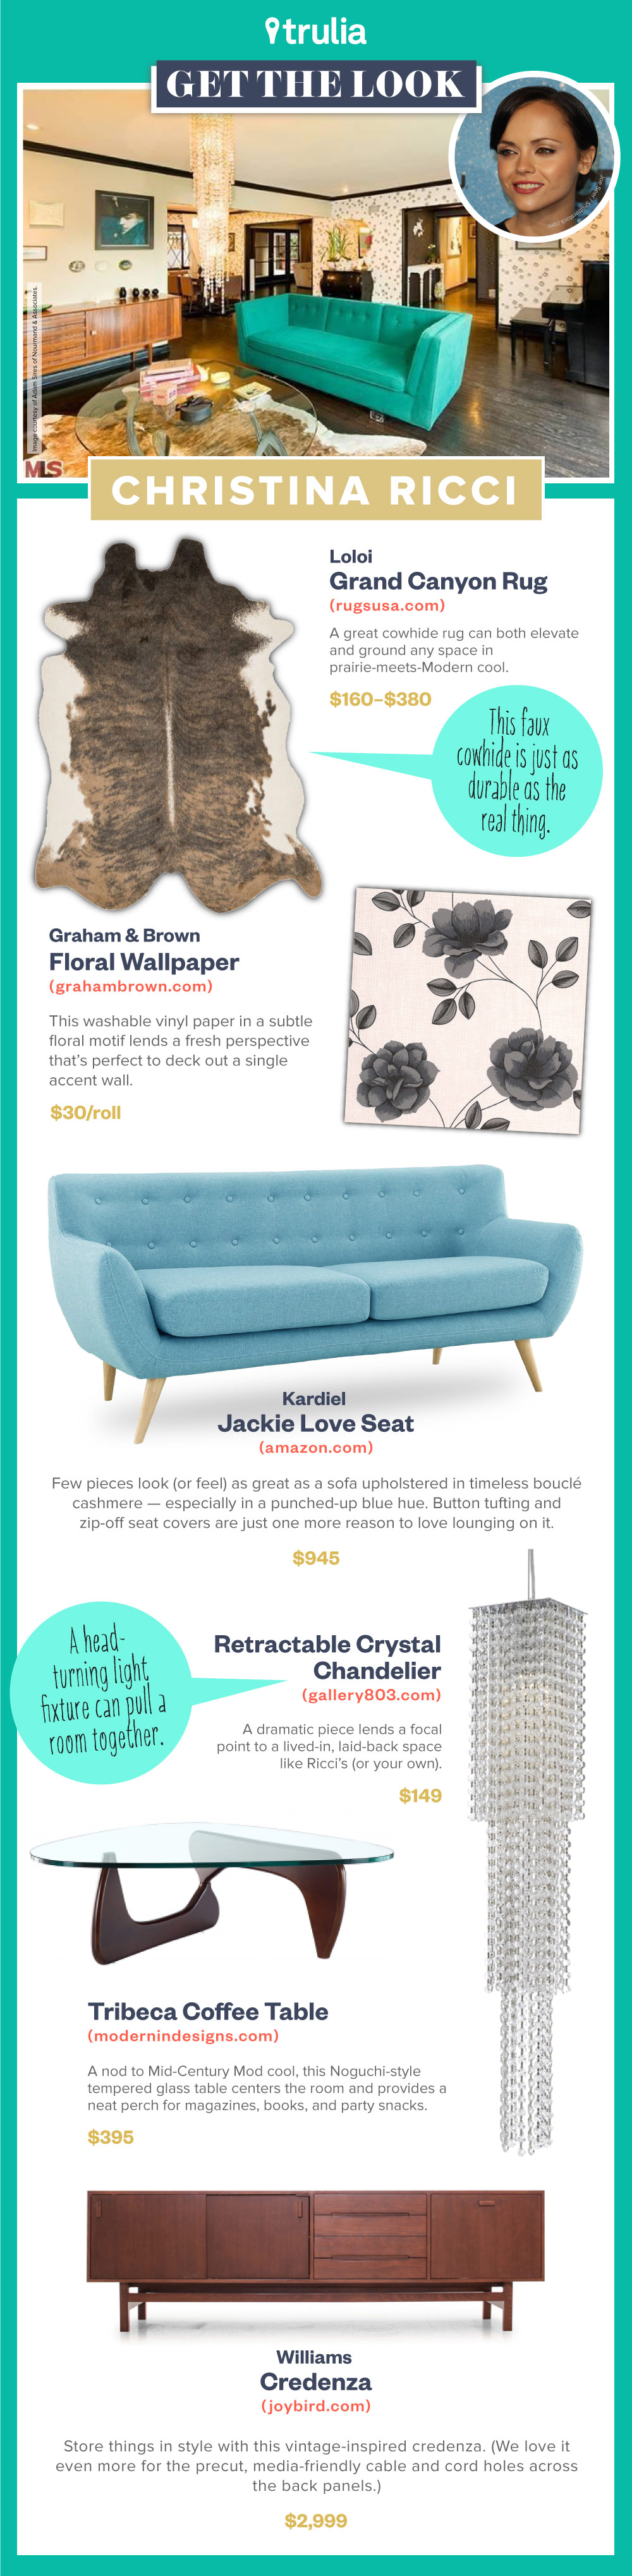 May2015-Trulia-Get-the-Look-Christina-Riccis-Eclectic-Living-Room